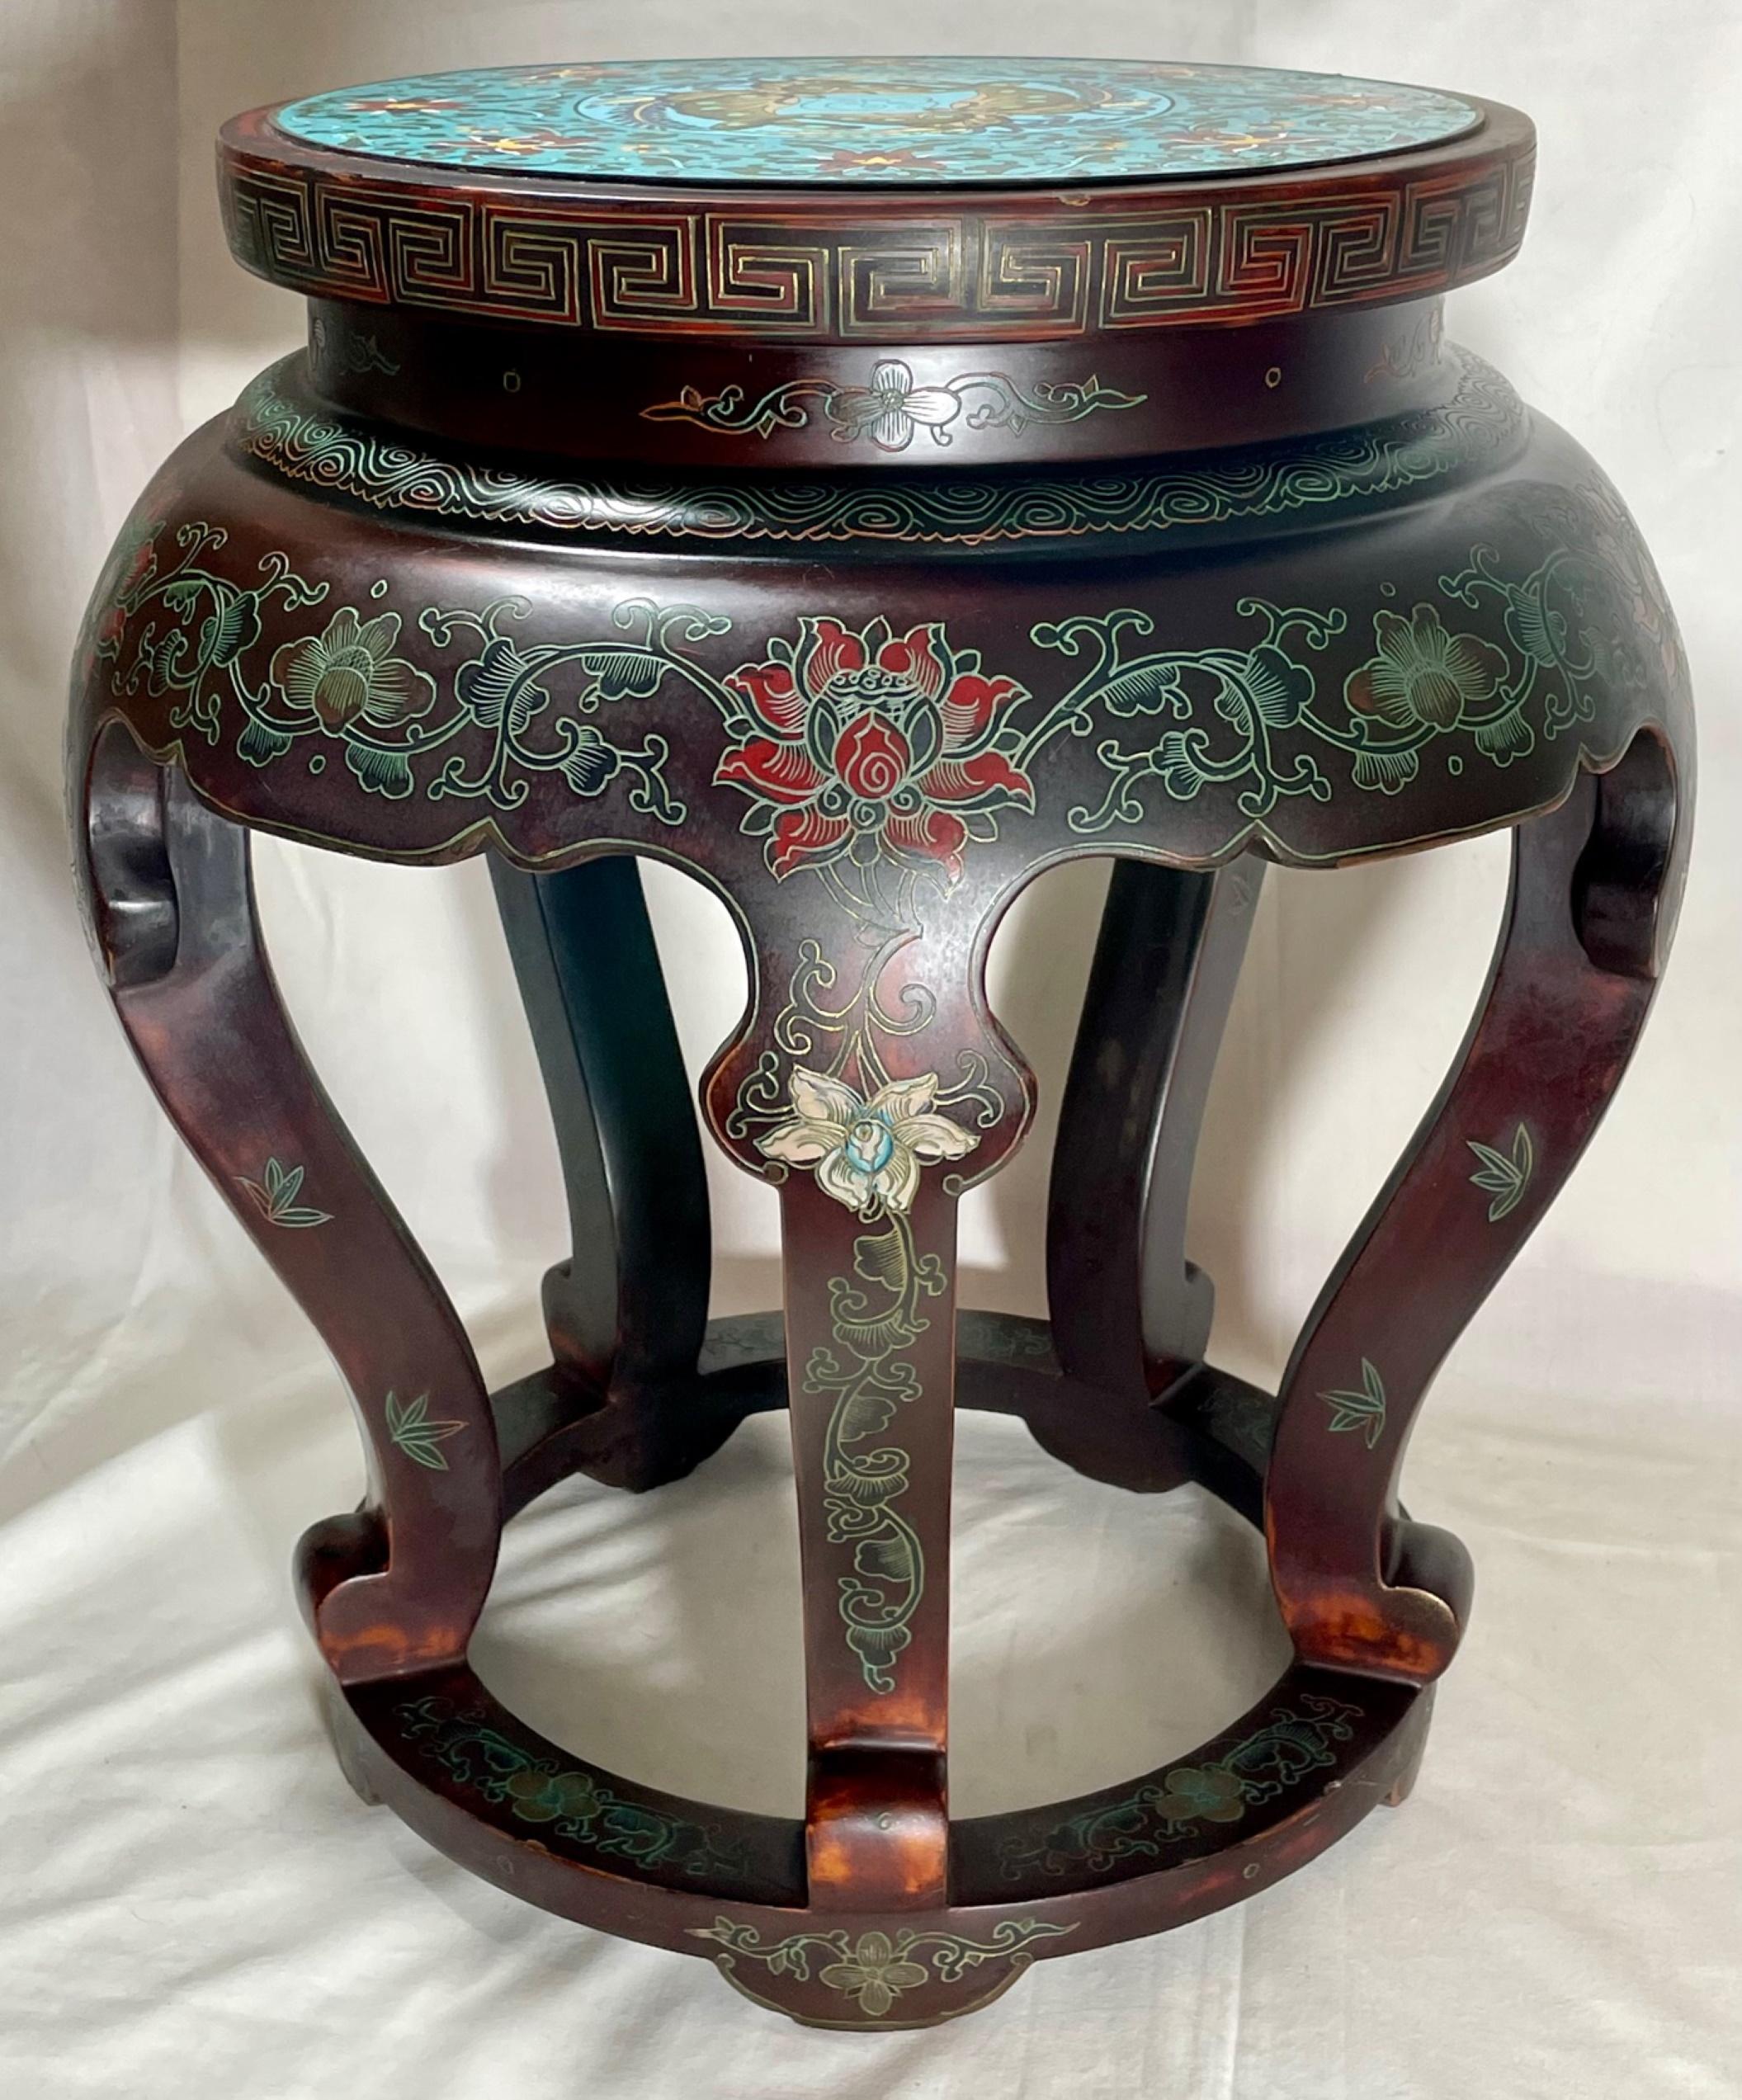 Vintage Chinese cloisonne chinoiserie plant stand jardiniere

This beautiful piece is comprised of five cabriole legs and features a cloisonne top on lacquered painted wood. The apron has a floral design and the edge is decorated with a Greek key